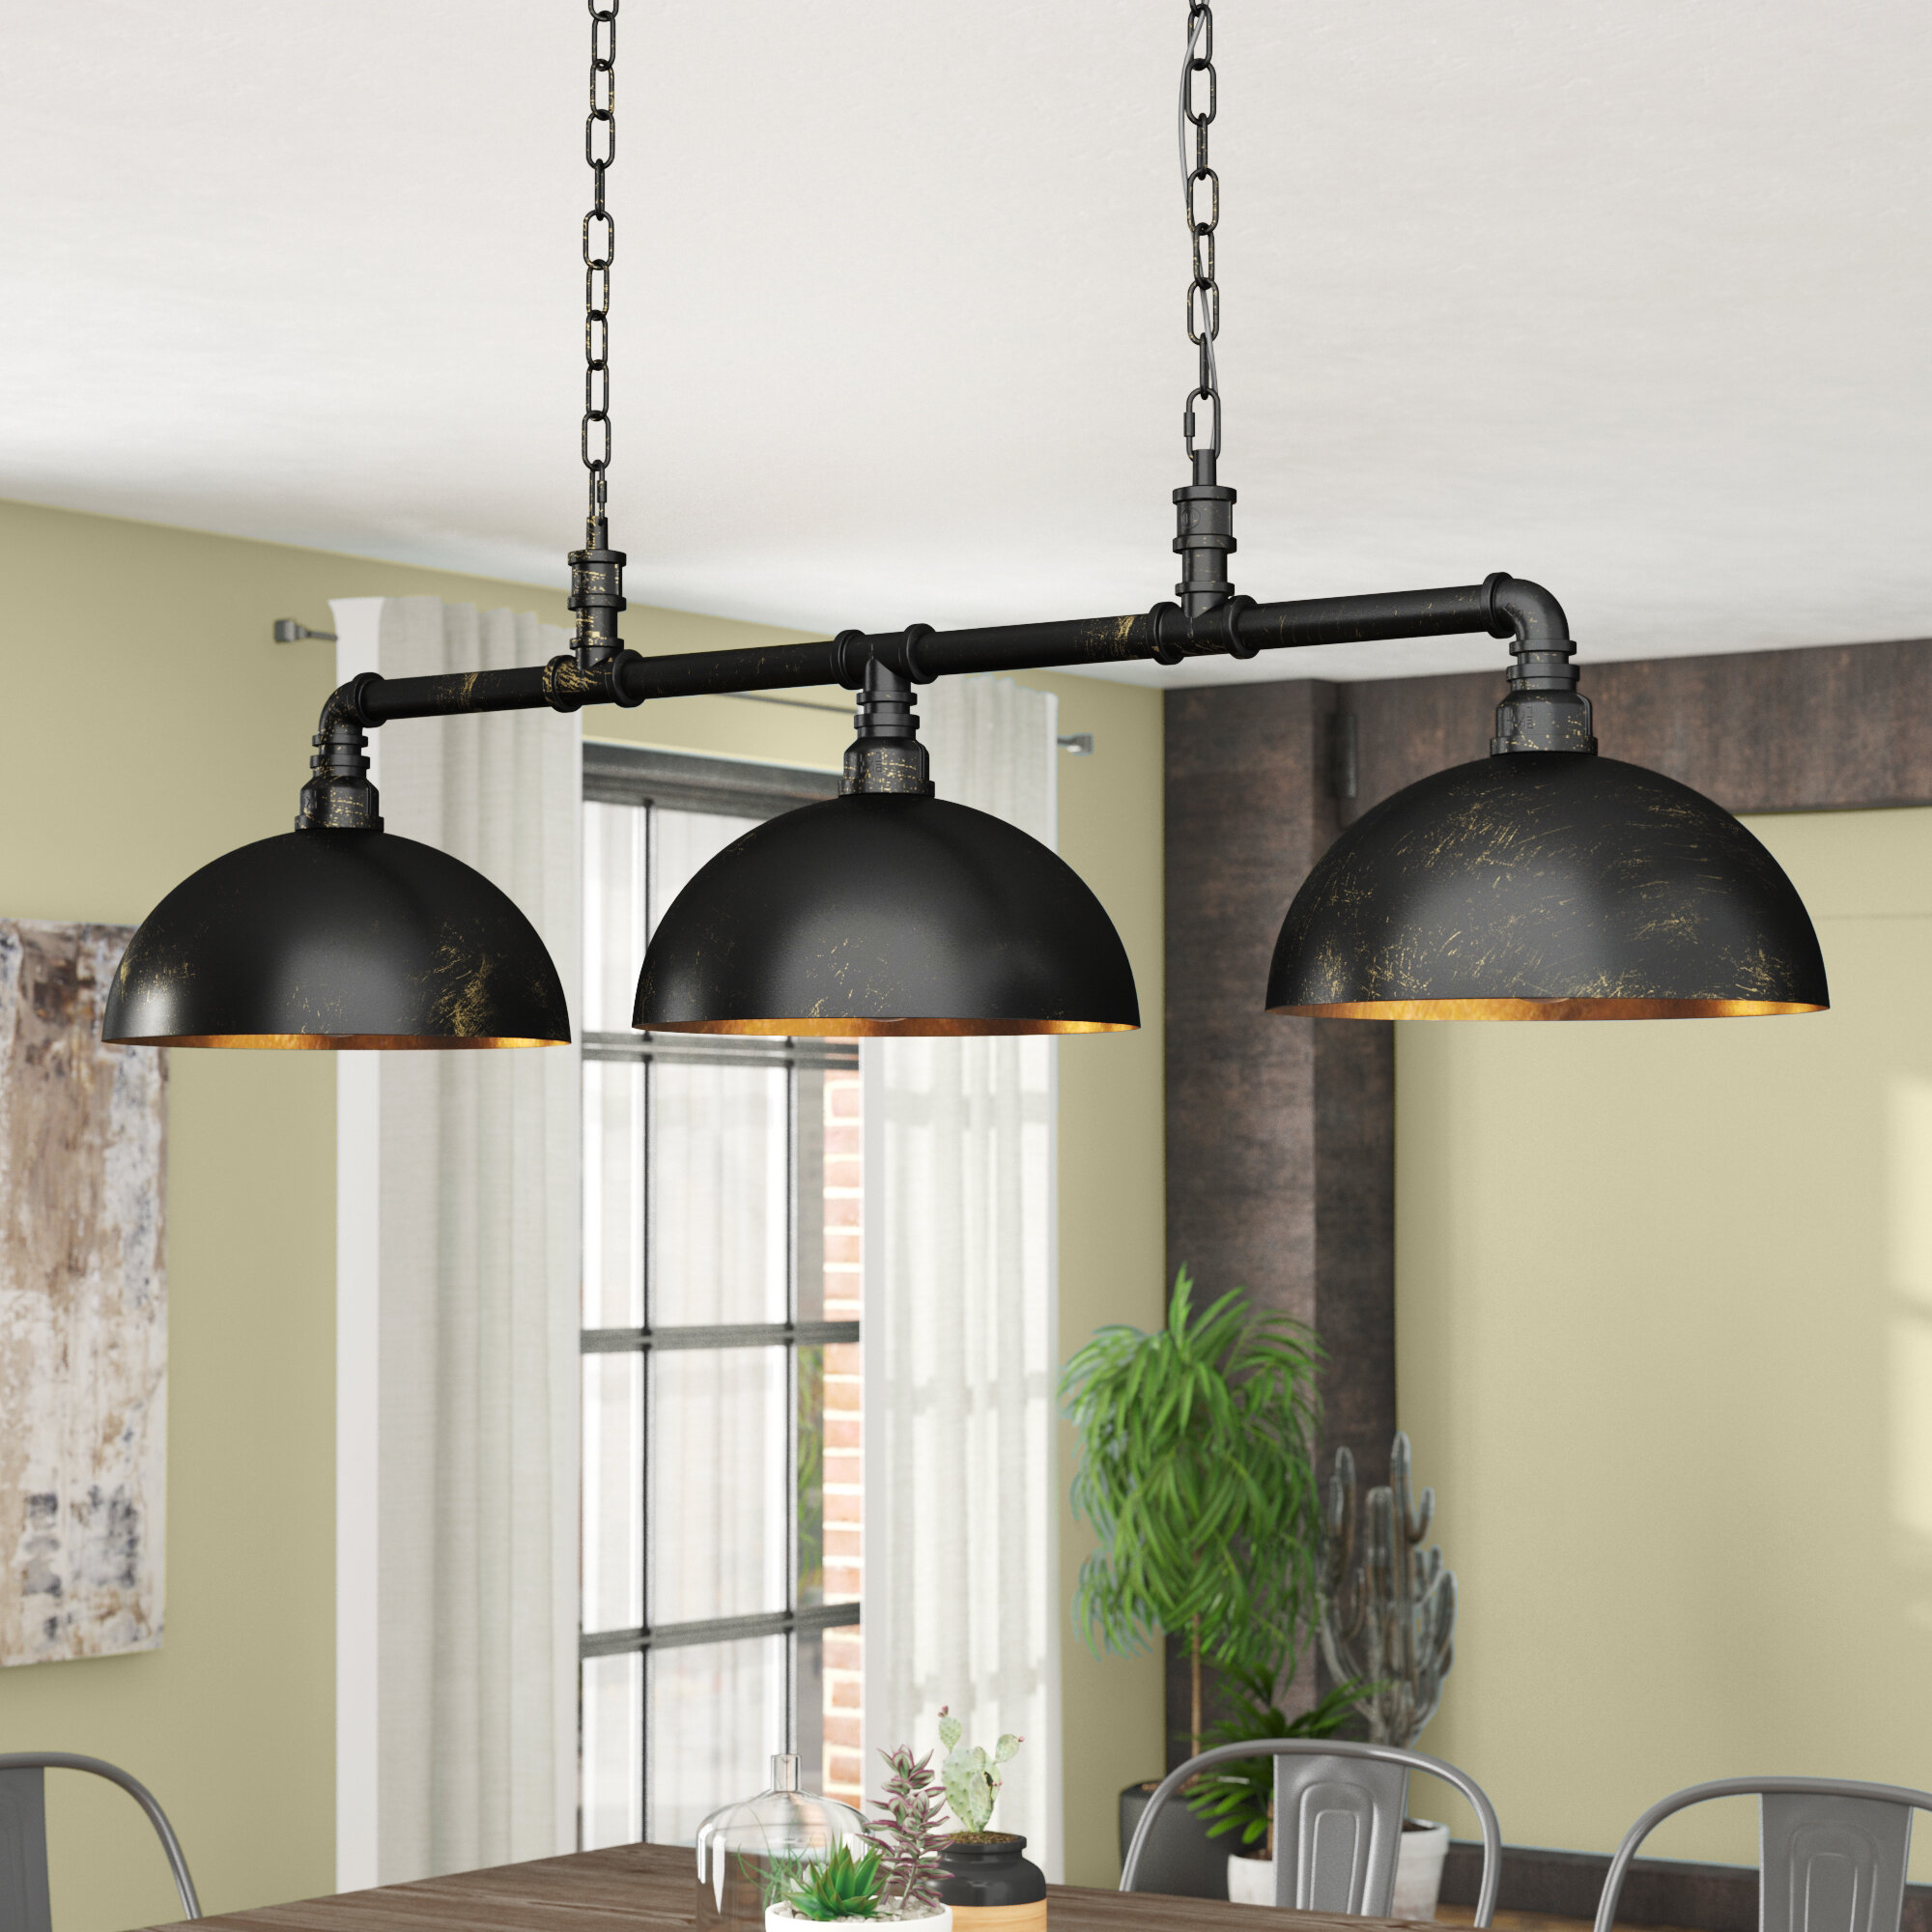 PUZHI HOME Black Industrial Kitchen Island Pendant Lighting 4-Light Modern Hanging Lamp Contemporary Light Fixtures with Frame Brass Lamp E26 Socket for Kitchen Dining Room